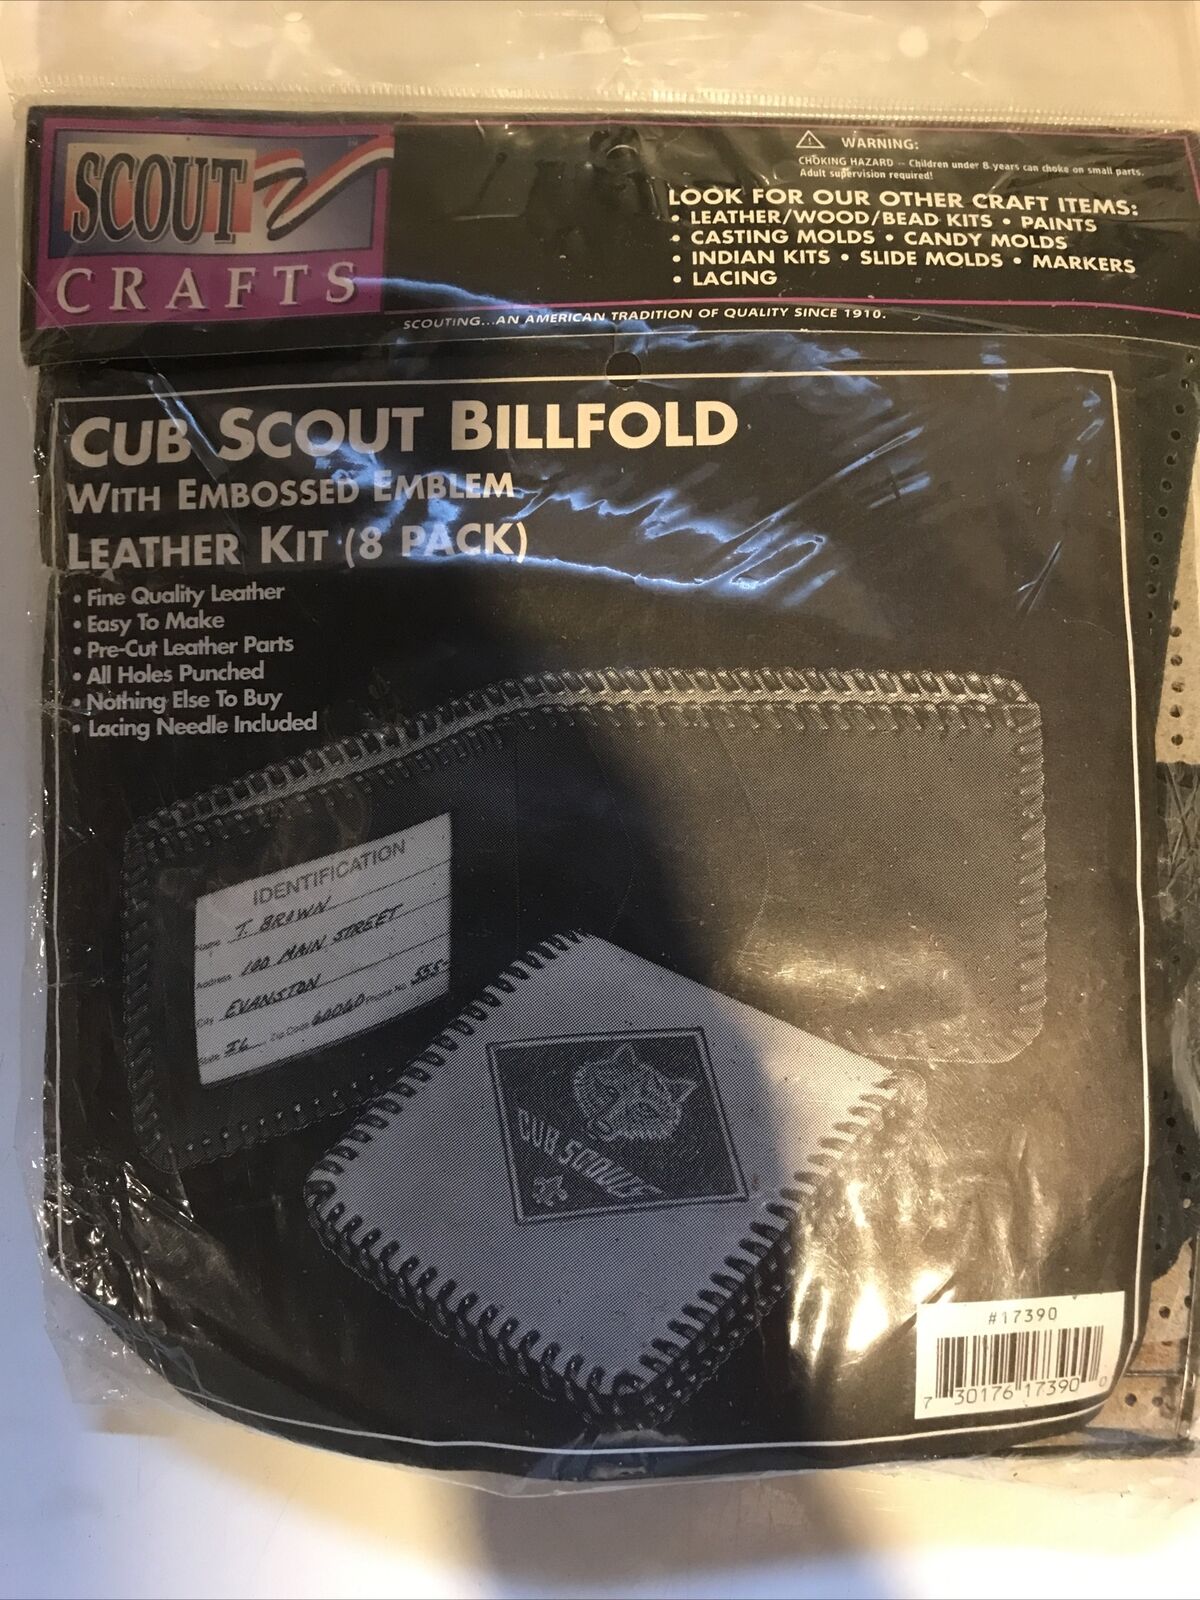 Scout Crafts - Cub Scout Billfold With Embossed Emblem Leather Kit 8 Pack